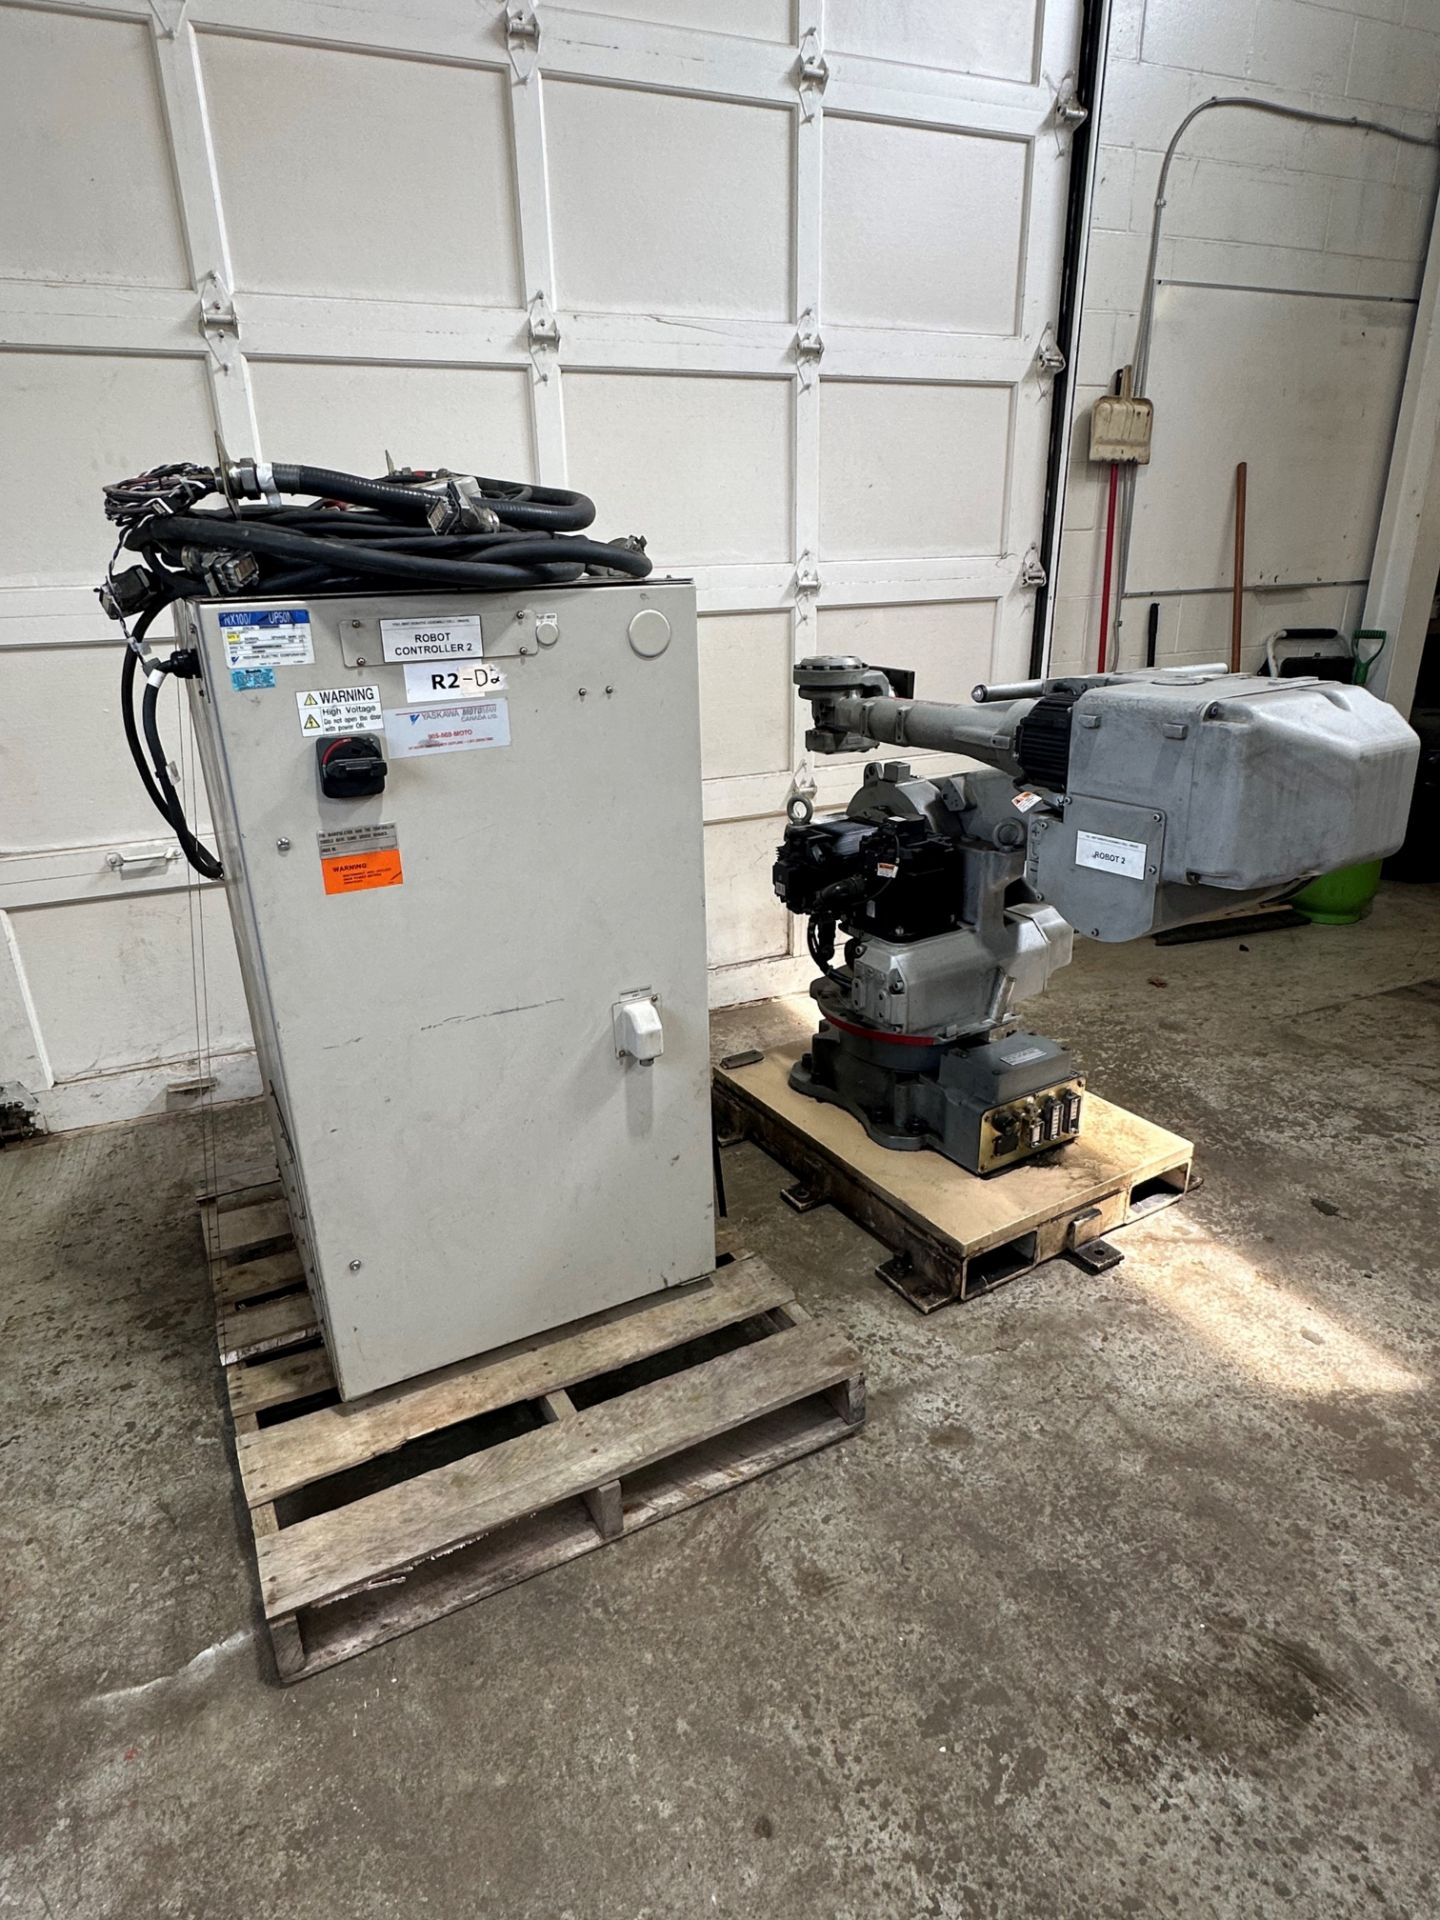 2006 MOTOMAN HP50 ROBOT, TYPE YR-UP50N-A00, 50KG PAYLOAD W/ CONTROLLER, CABLES, PENDANT (LOCATED